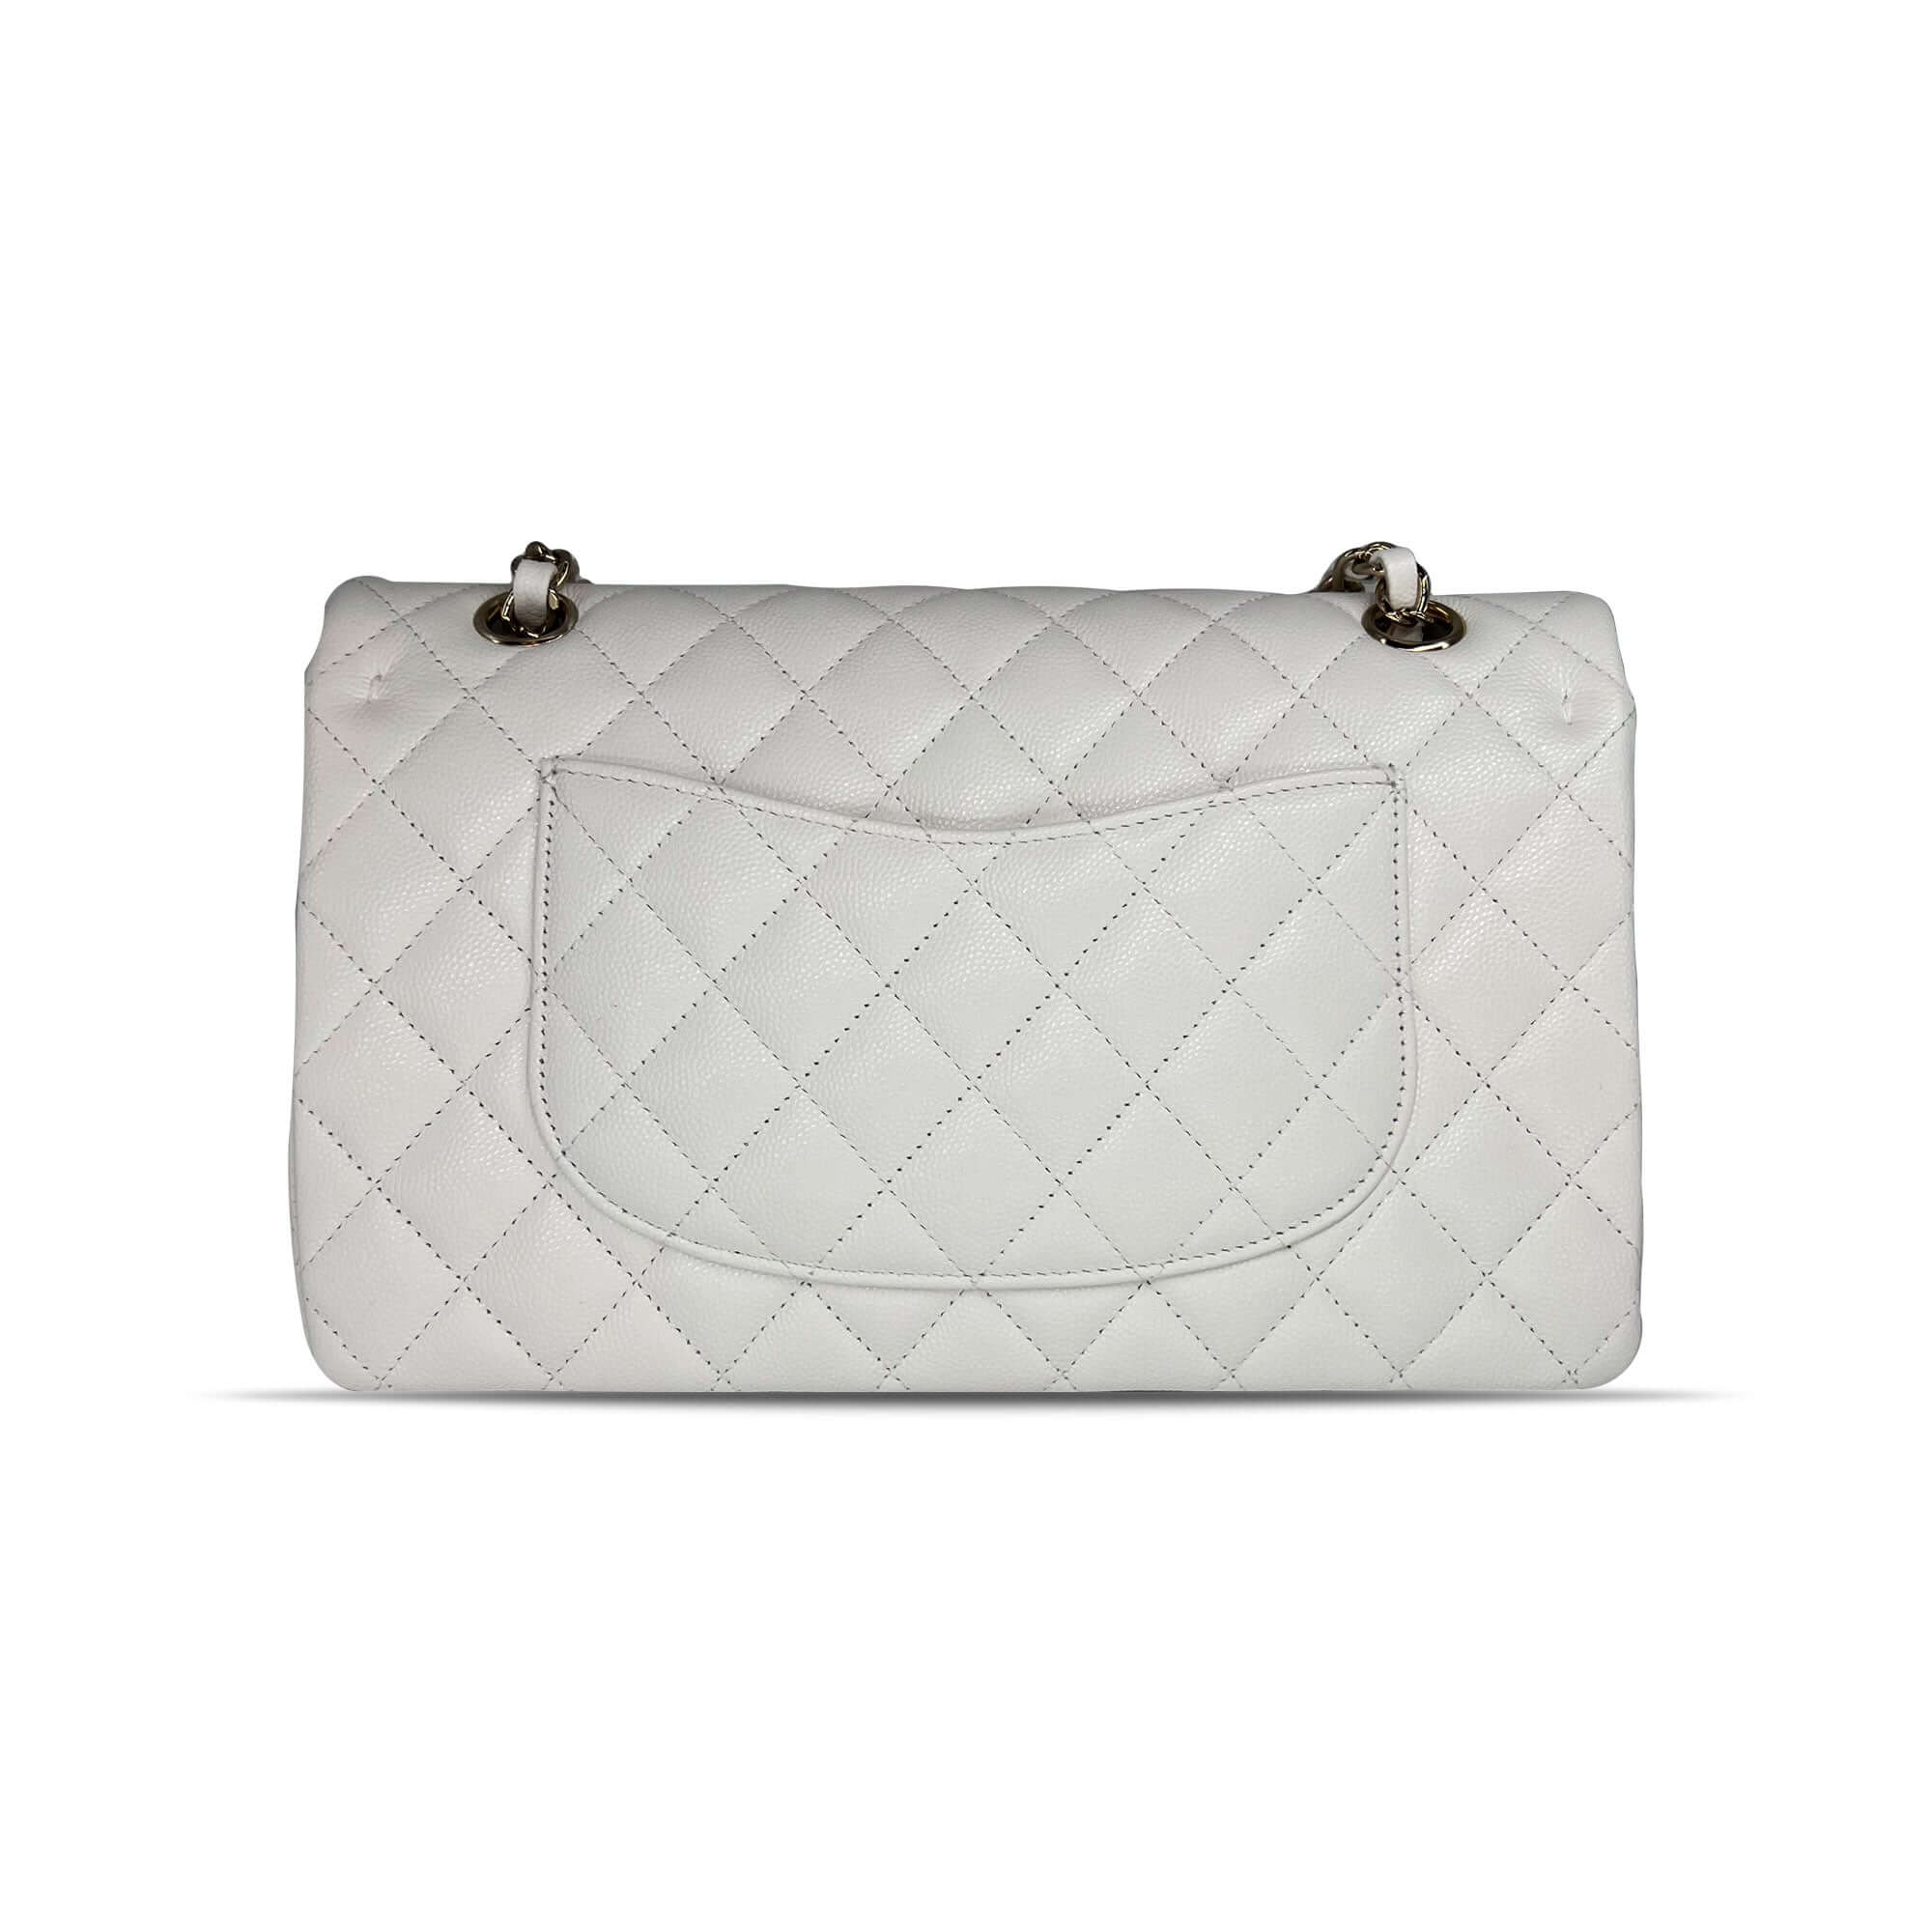 Pre owned Chanel optic white caviar leather double flap closure